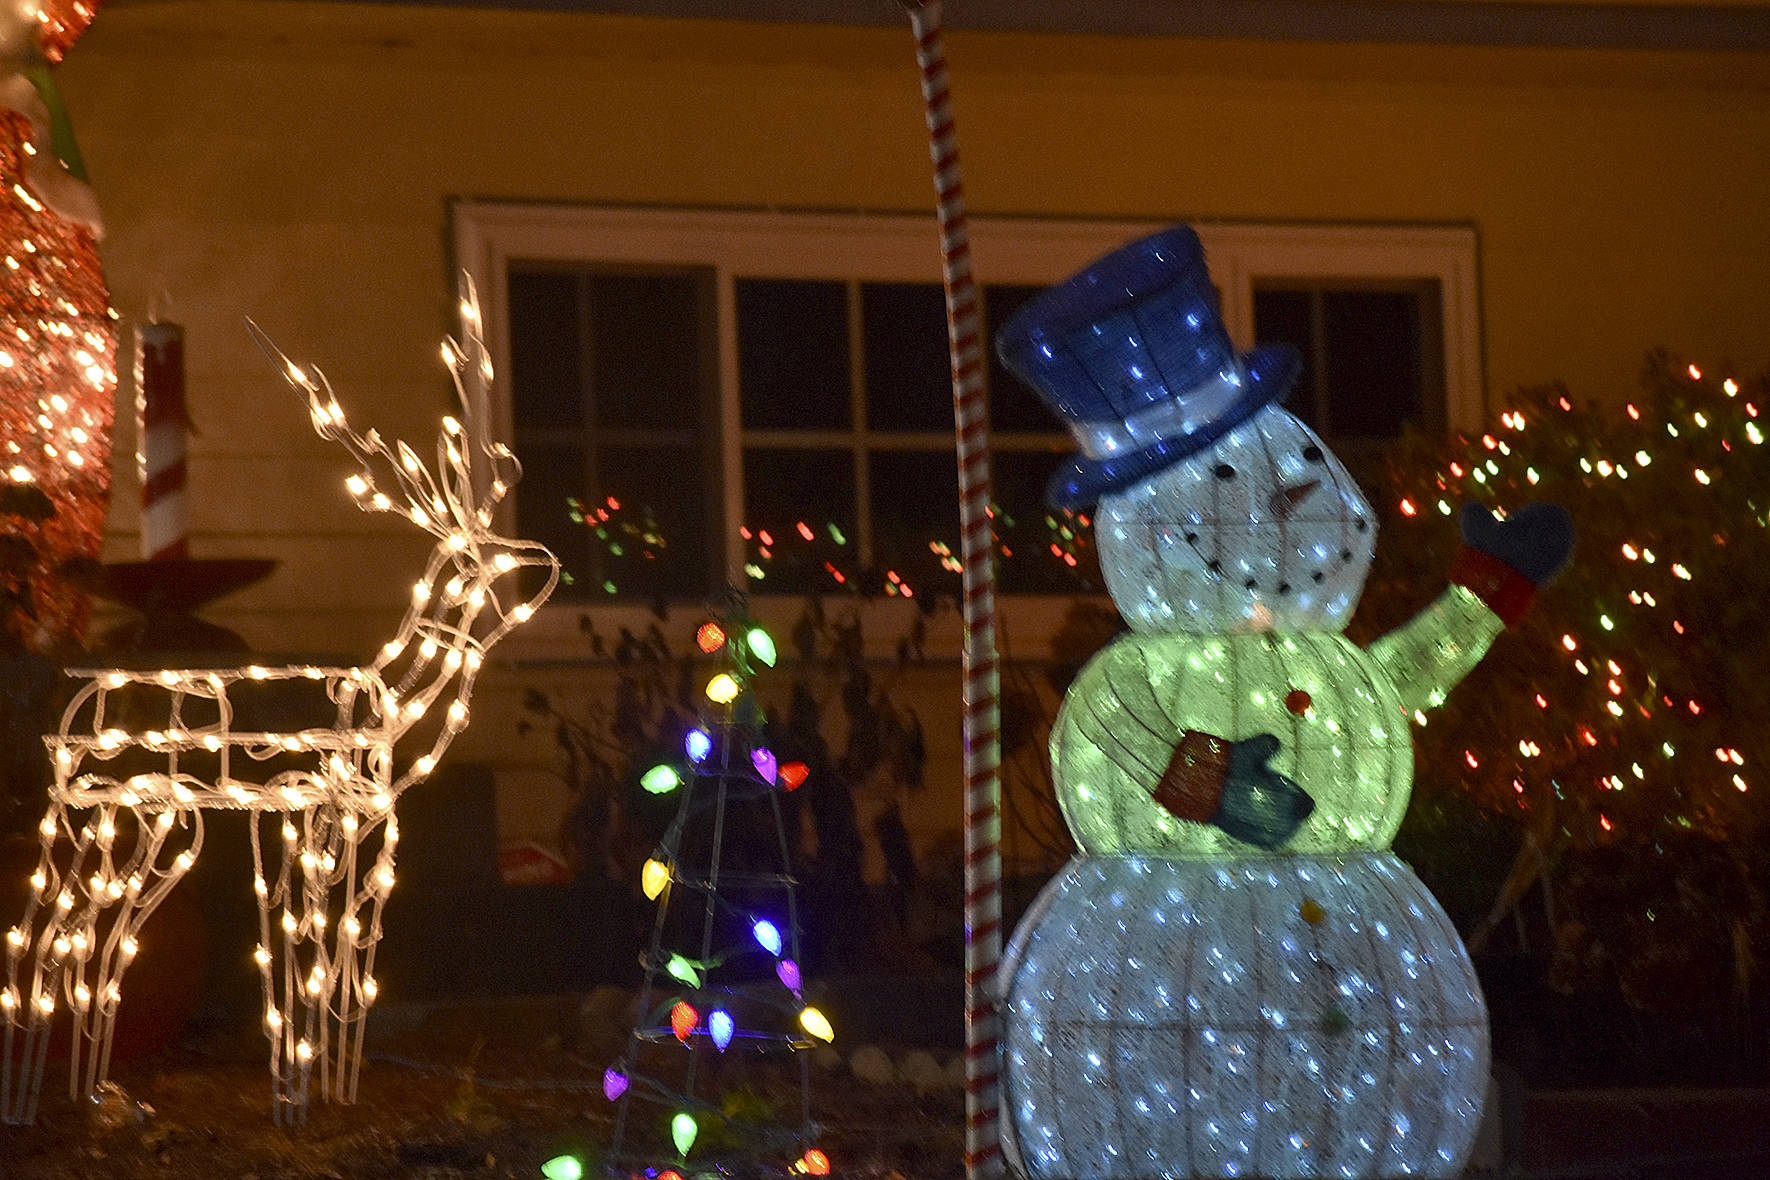 Renton lights up for the holidays